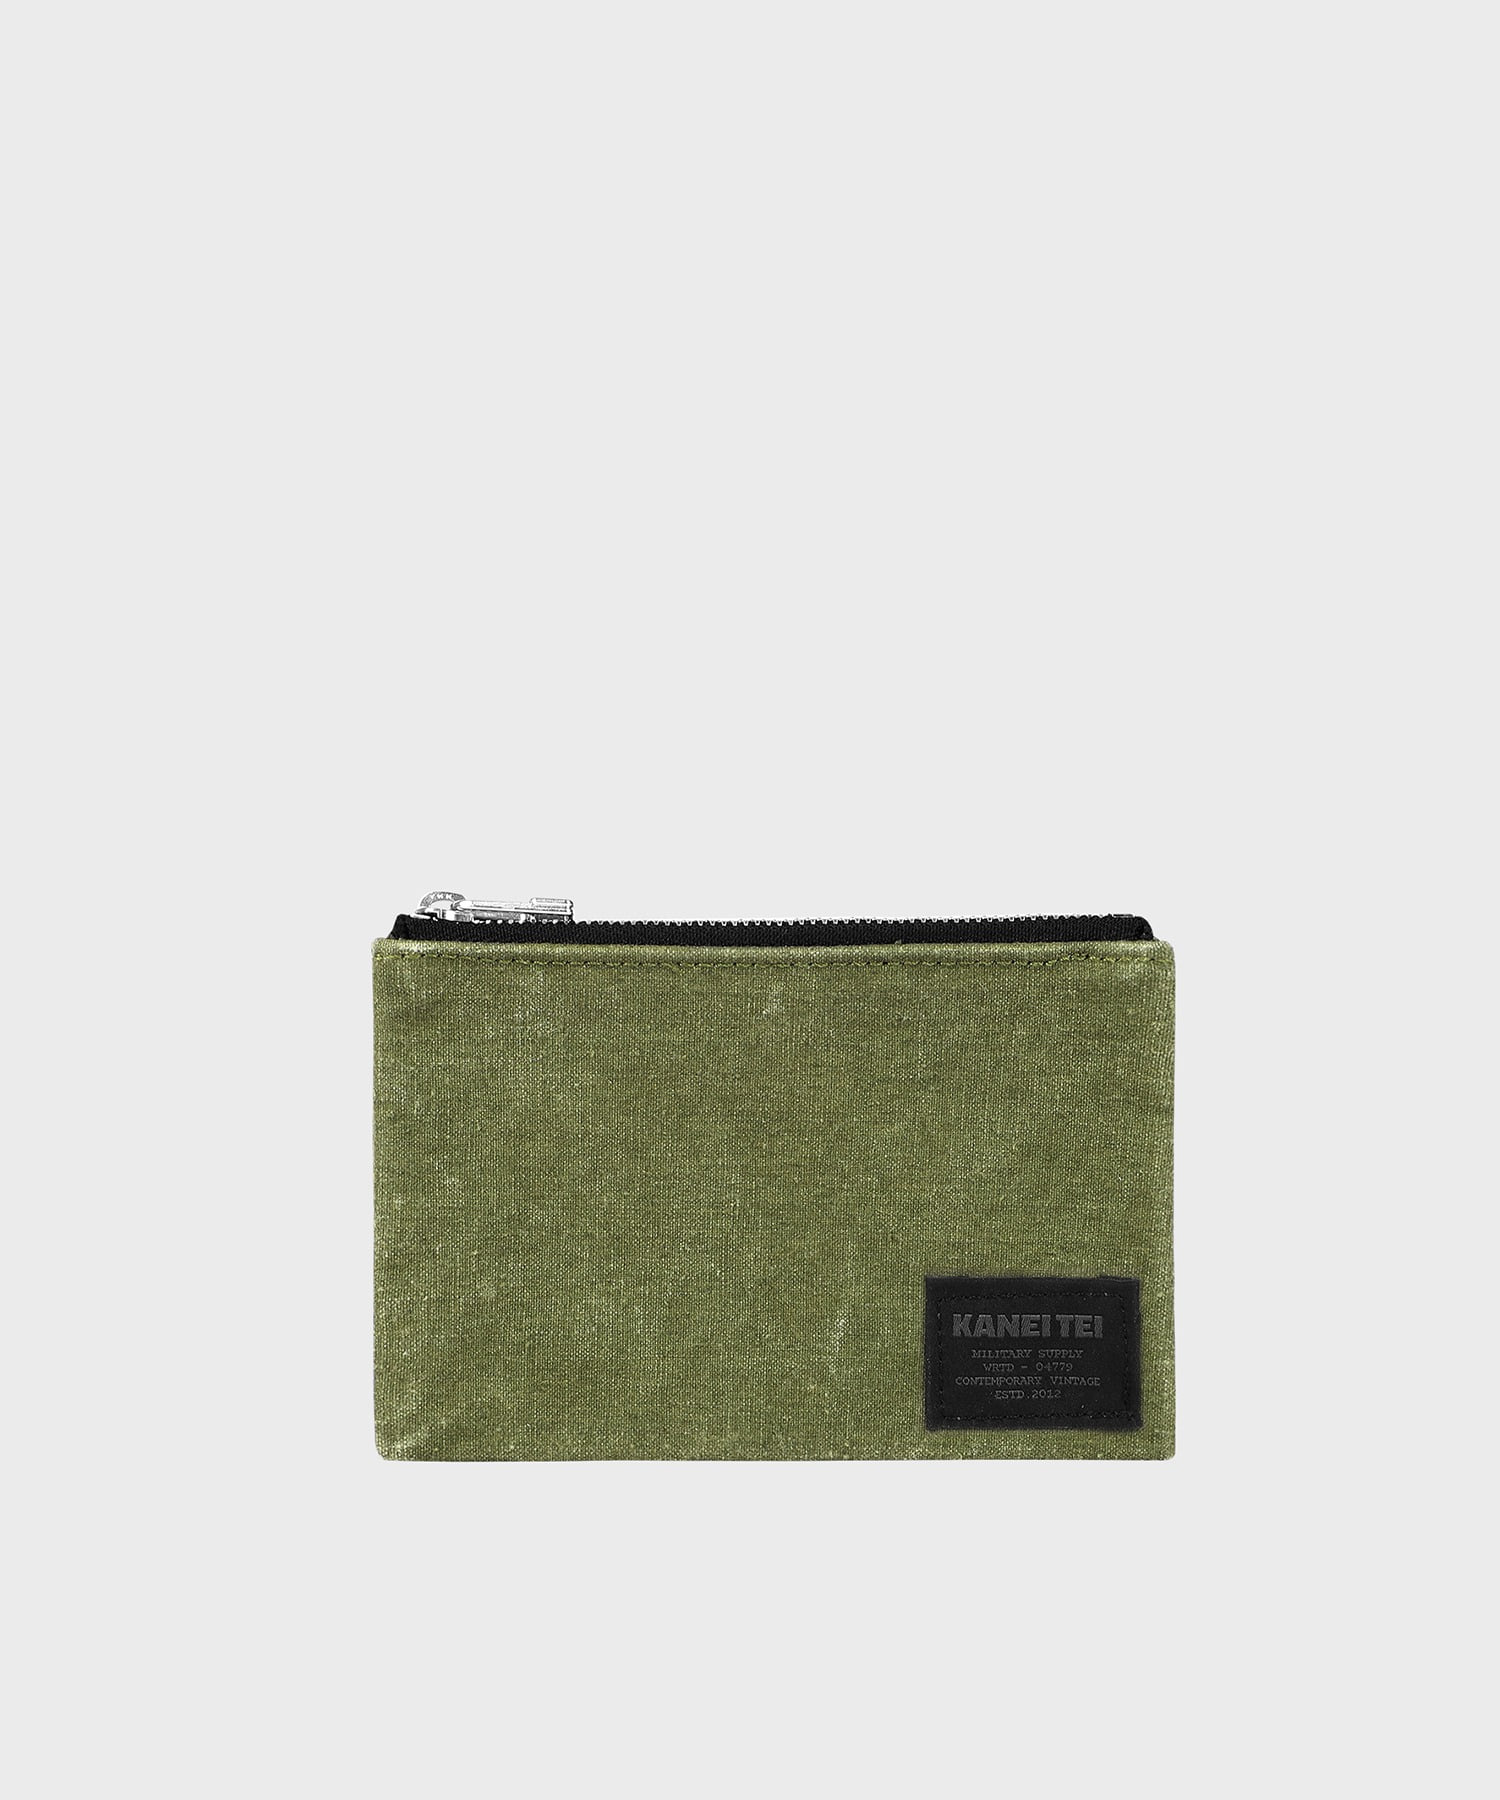 HAIKU FLAT POUCH S (OLIVE DRAB) / UPCYCLED